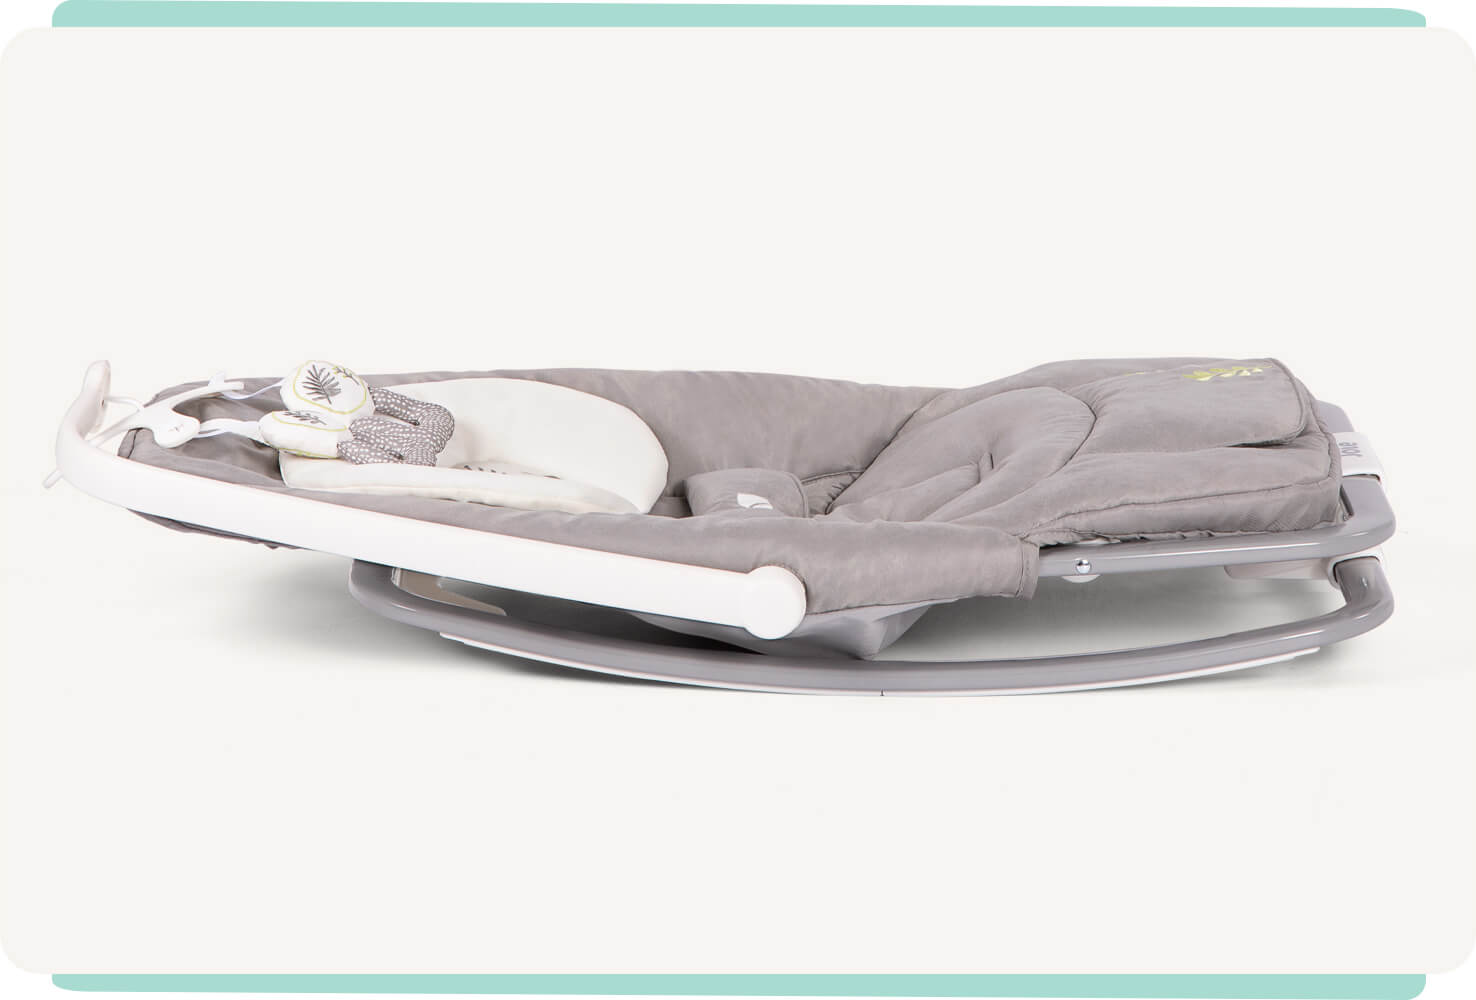 Grey patterned dreamer Joie bouncer lying flat on the ground to display compact feature.